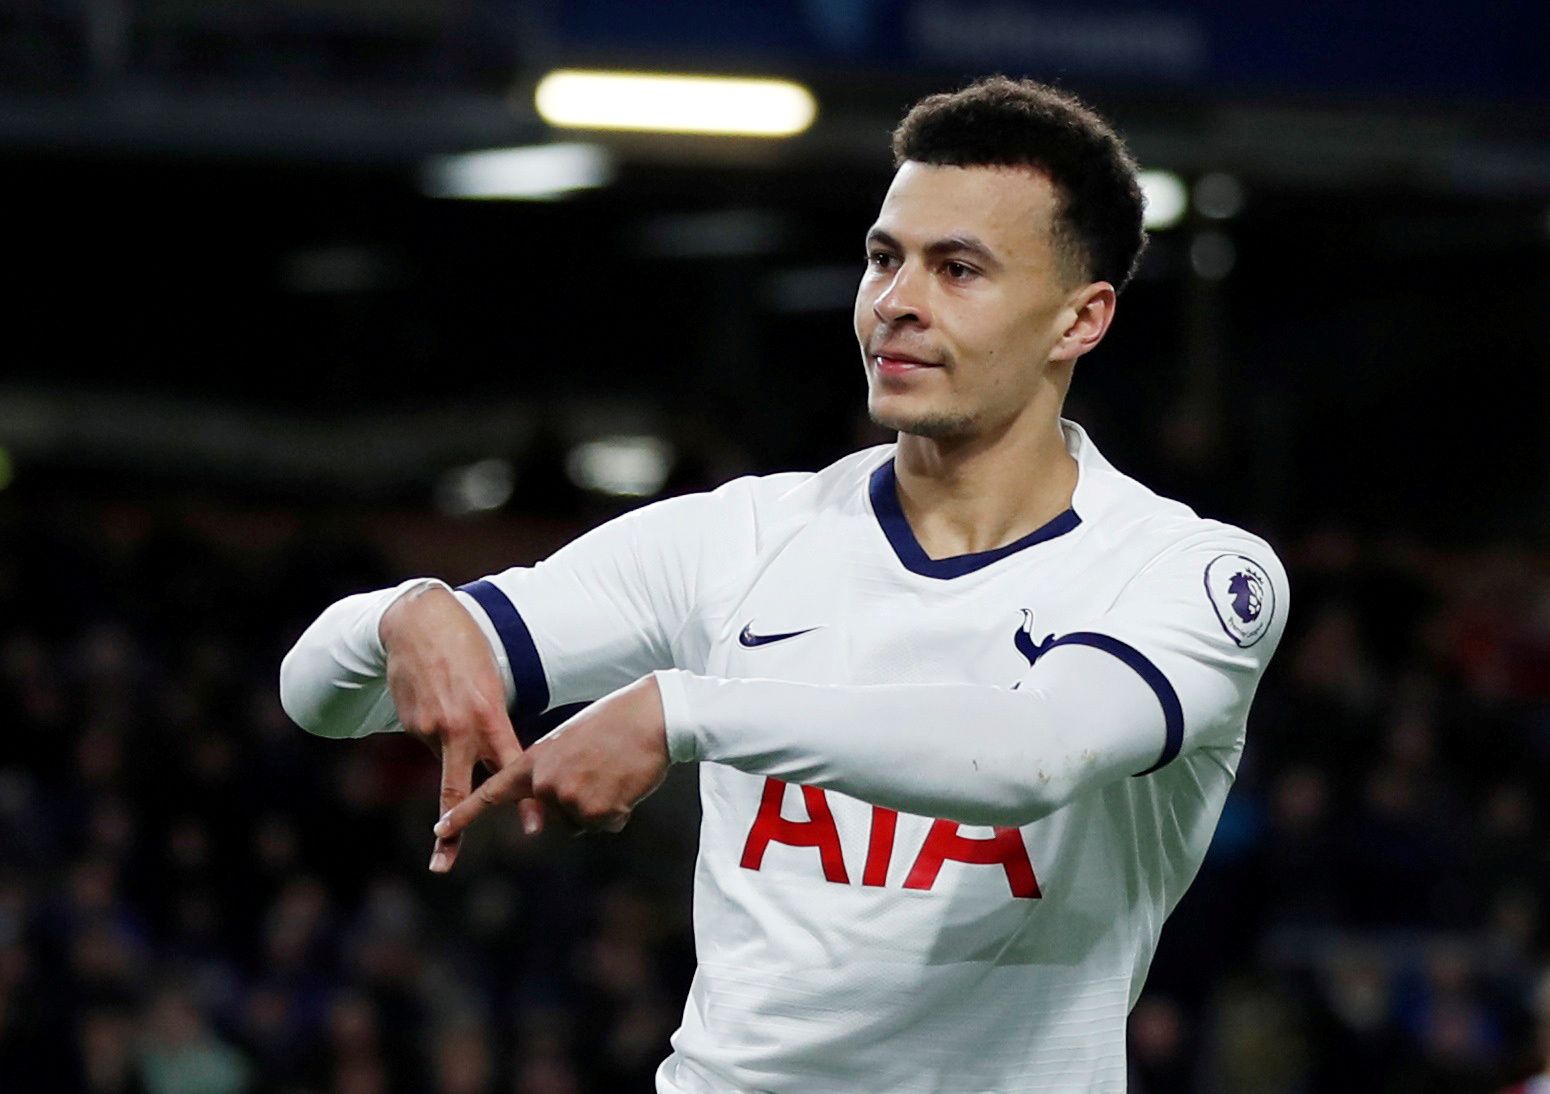 Soccer Football - Premier League - Burnley v Tottenham Hotspur - Turf Moor, Burnley, Britain - March 7, 2020  Tottenham Hotspur's Dele Alli celebrates scoring their first goal   Action Images via Reuters/Lee Smith  EDITORIAL USE ONLY. No use with unauthorized audio, video, data, fixture lists, club/league logos or 